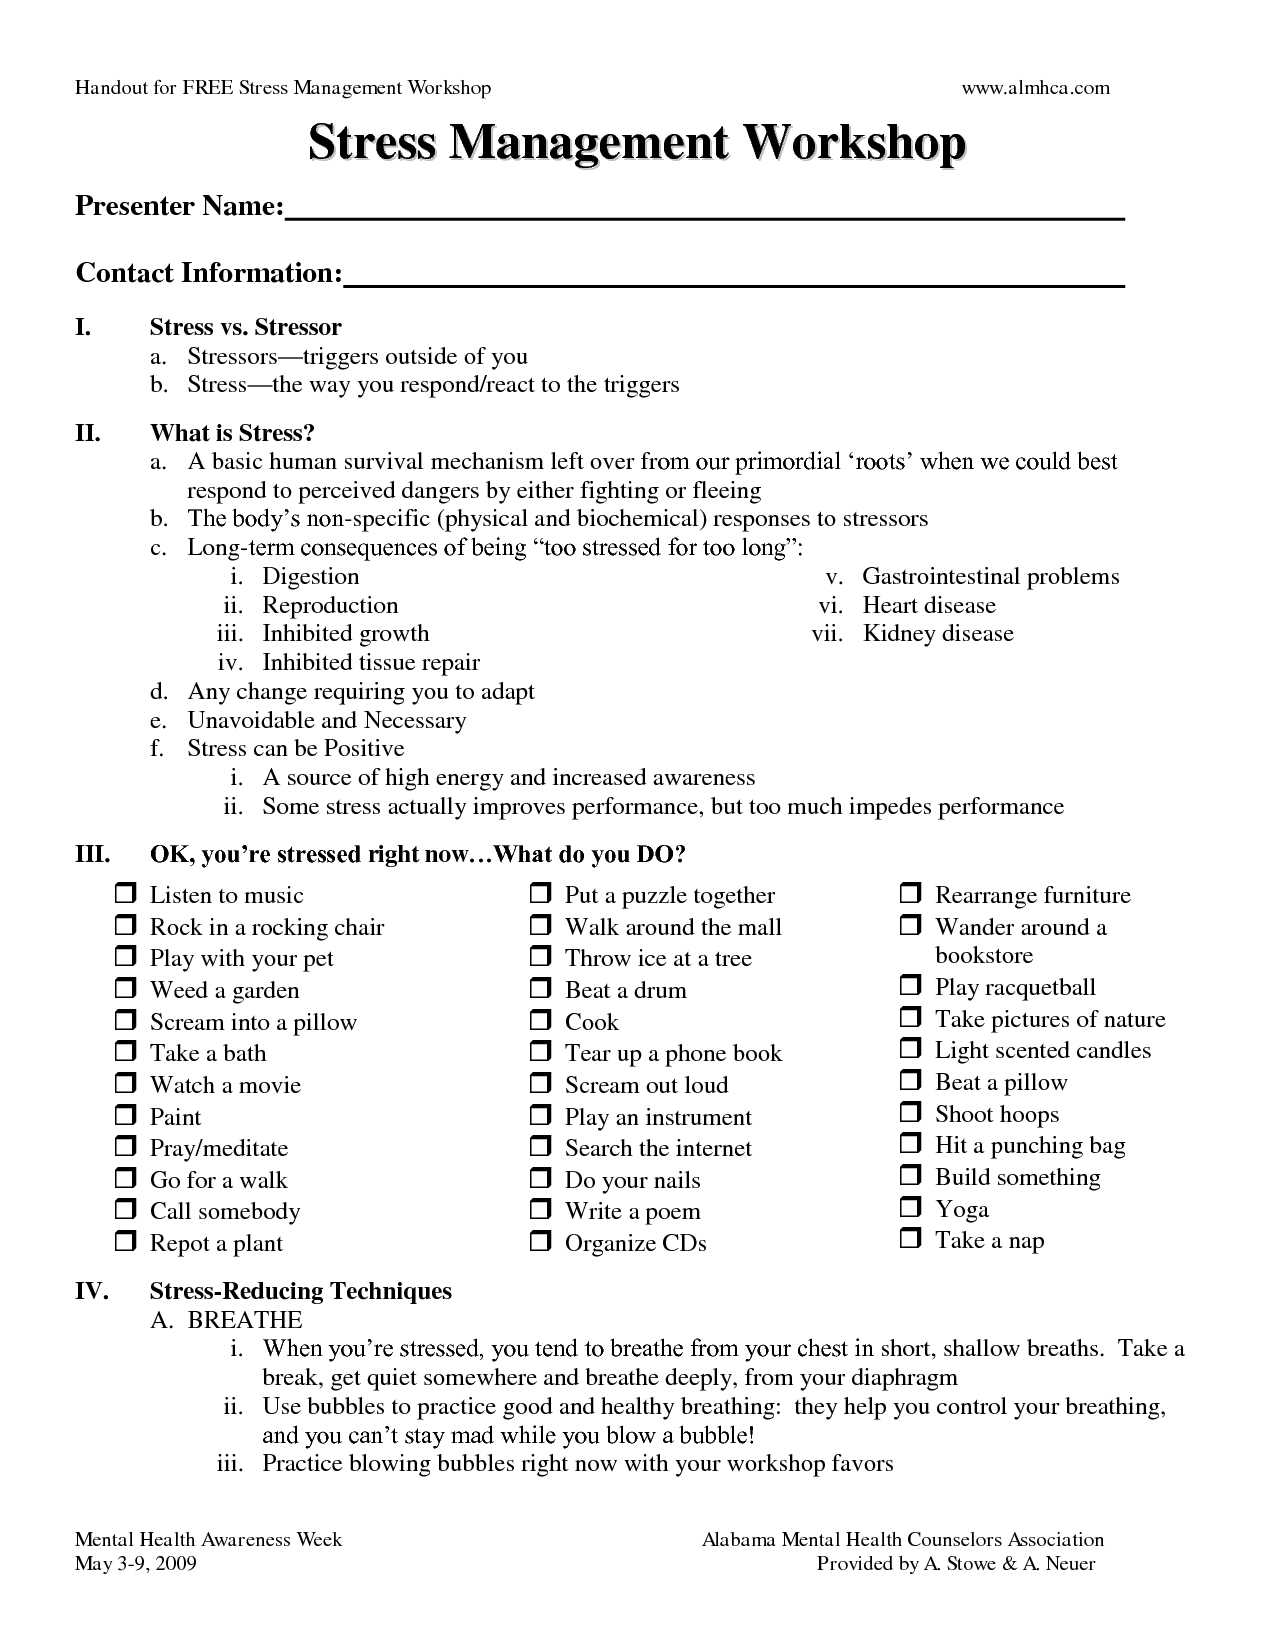 Act English Practice Worksheets Pdf as Well as Stress Management Worksheets